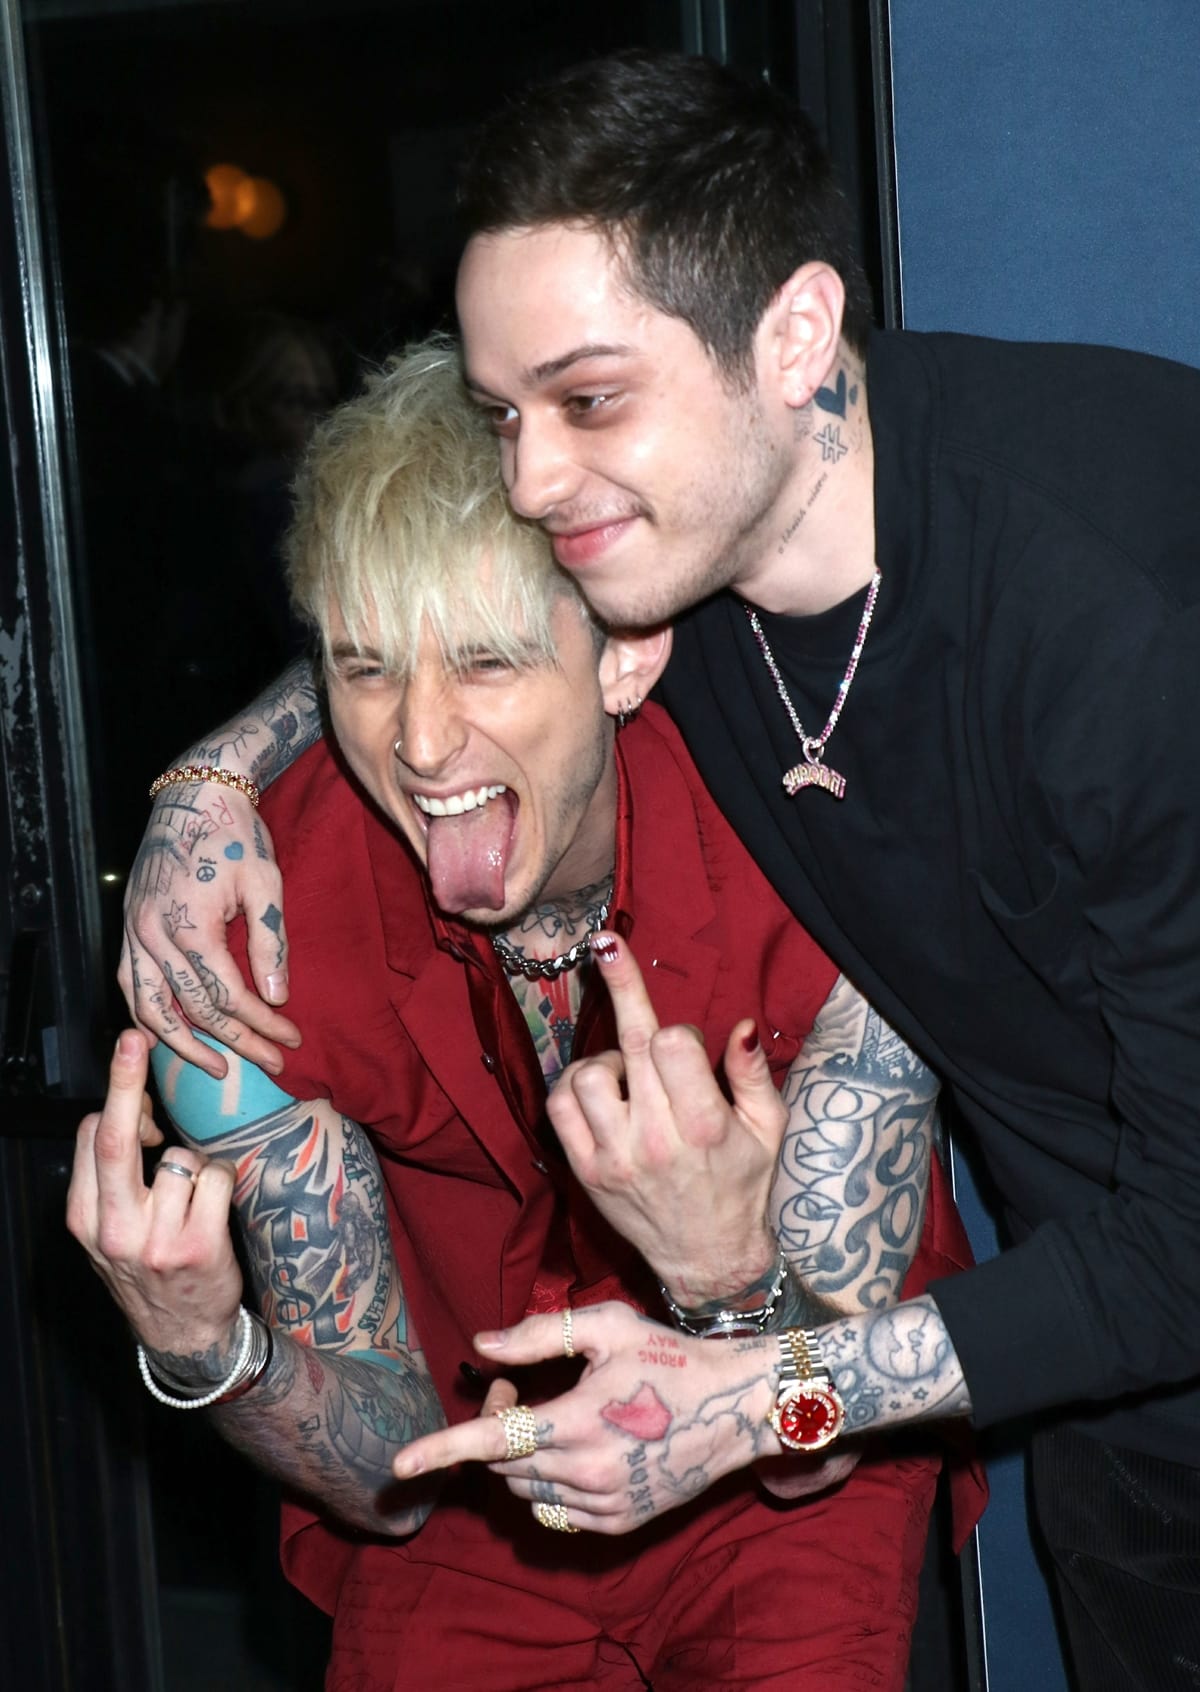 Machine Gun Kelly (AKA Colson Baker) and Pete Davidson became friends after meeting on the set of "Wild 'N Out" in 2017